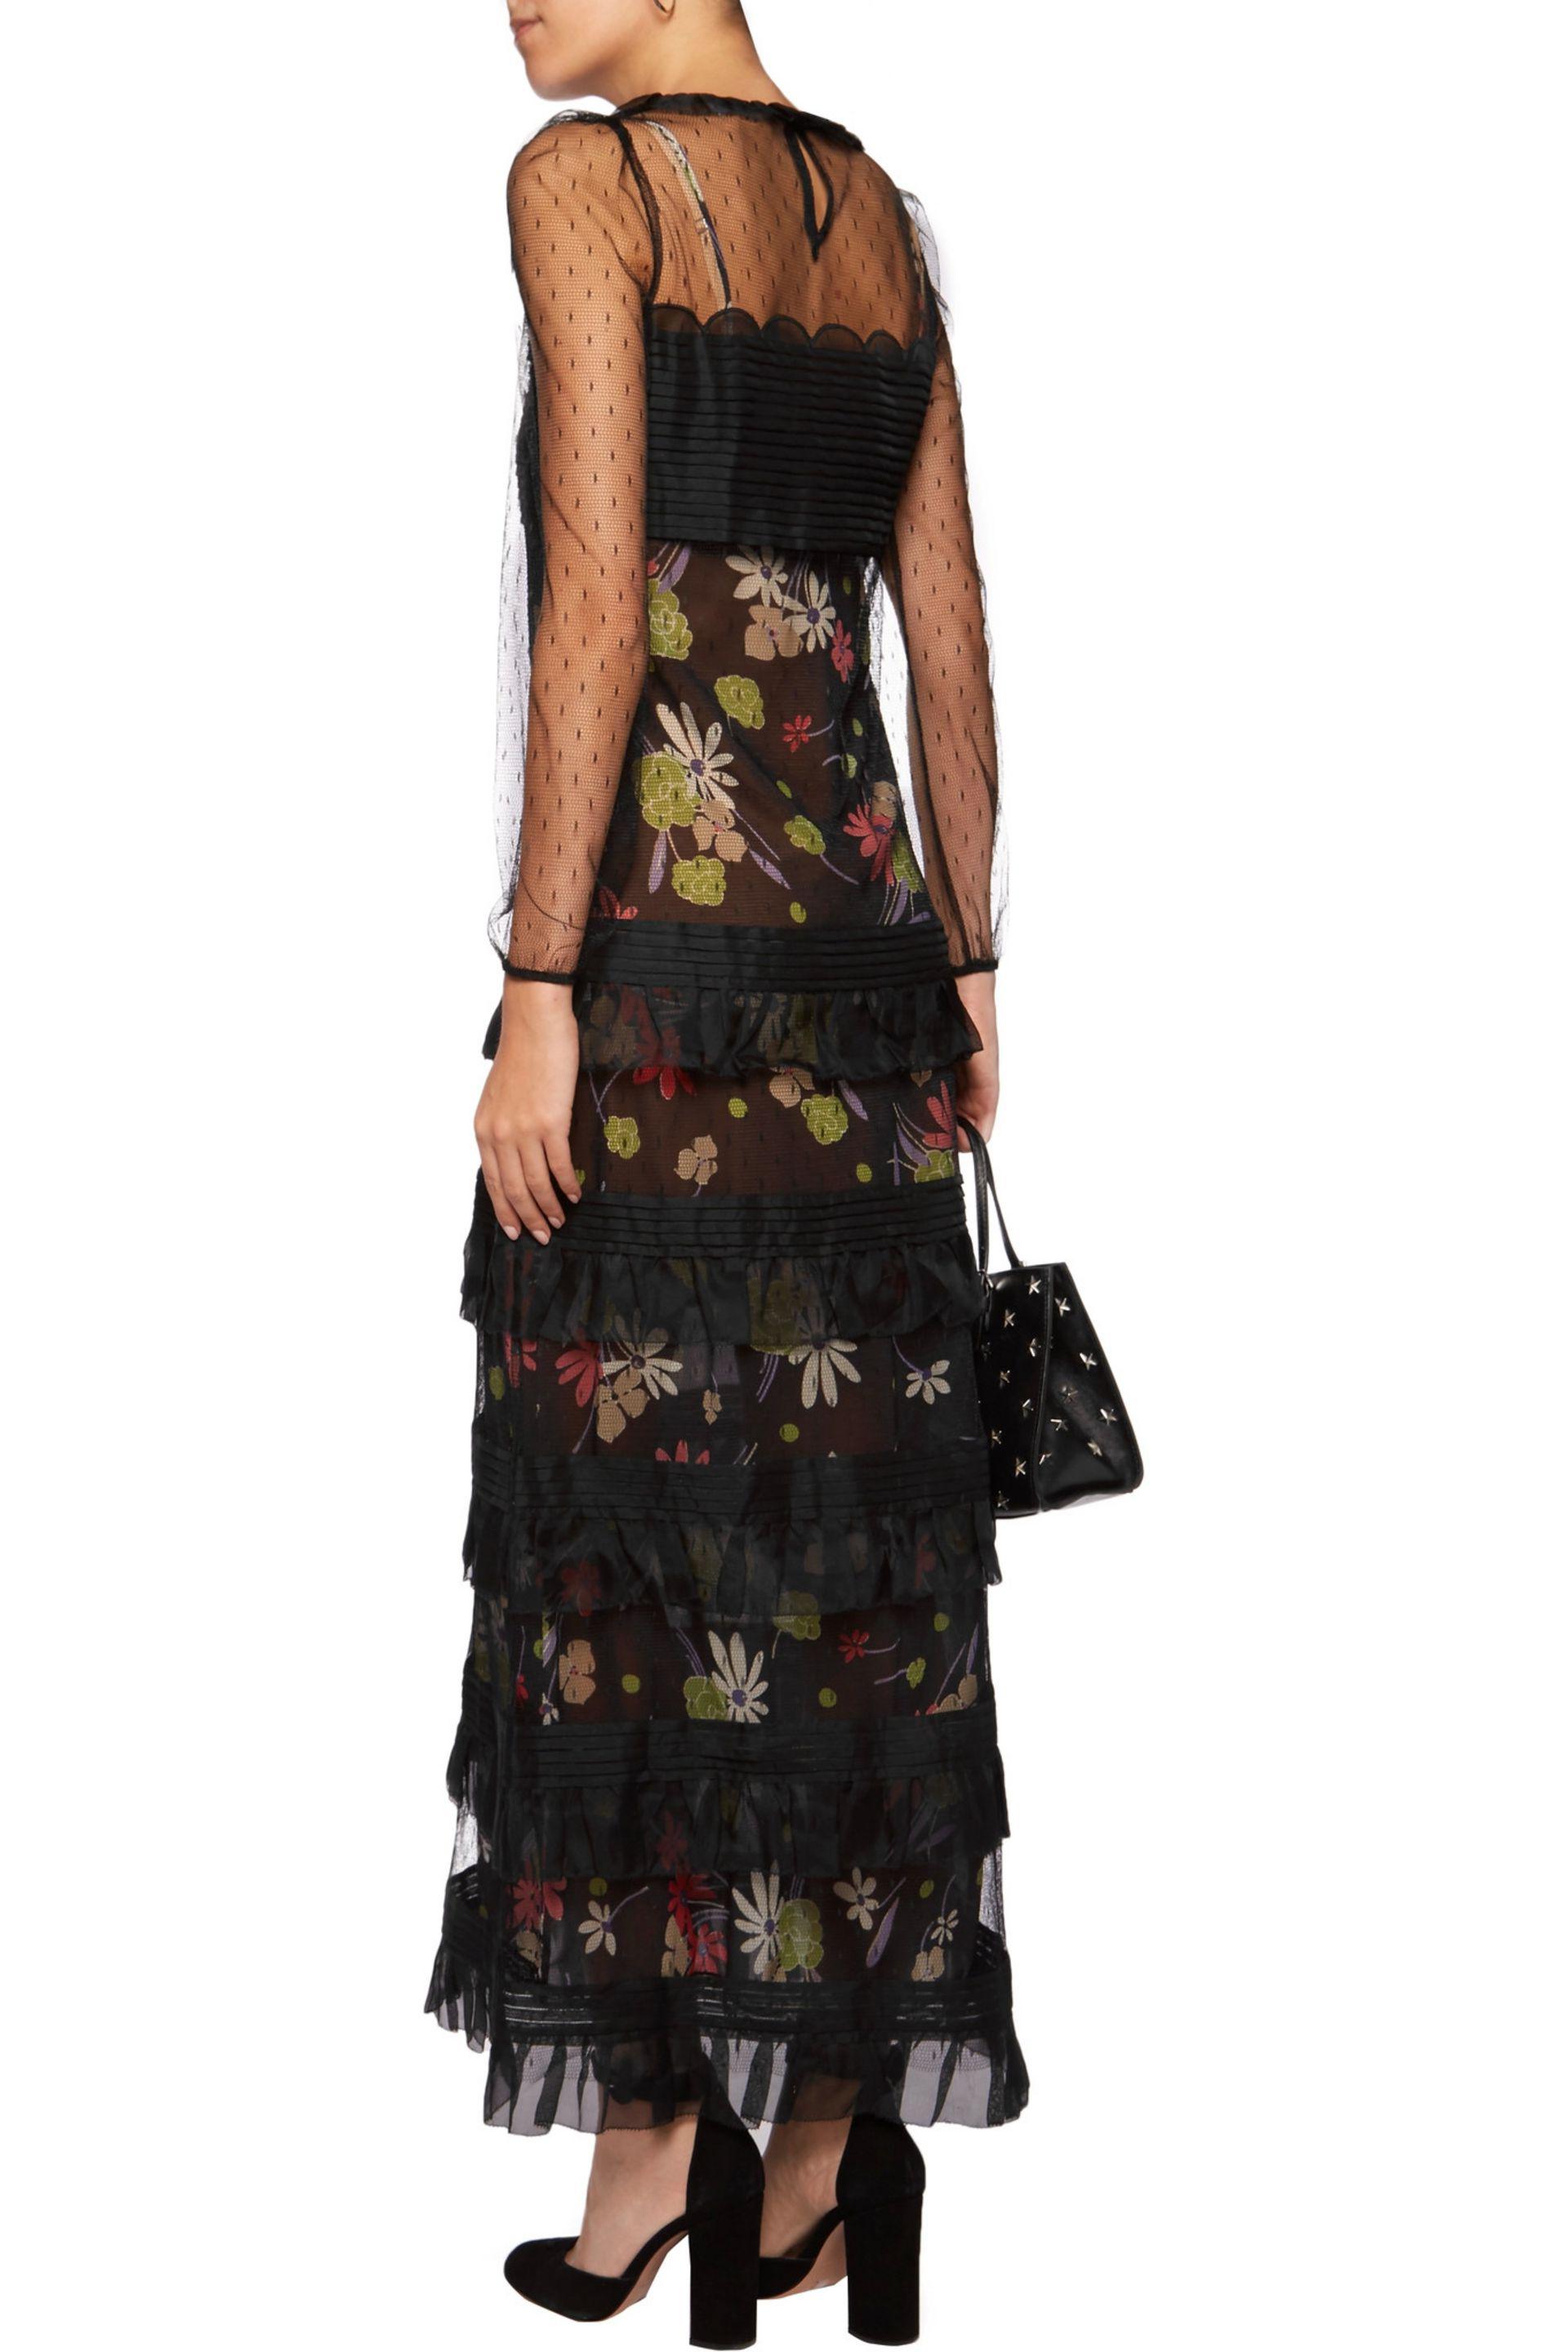 RED Valentino Point D'esprit-paneled Tiered Floral-print Chiffon Maxi ...